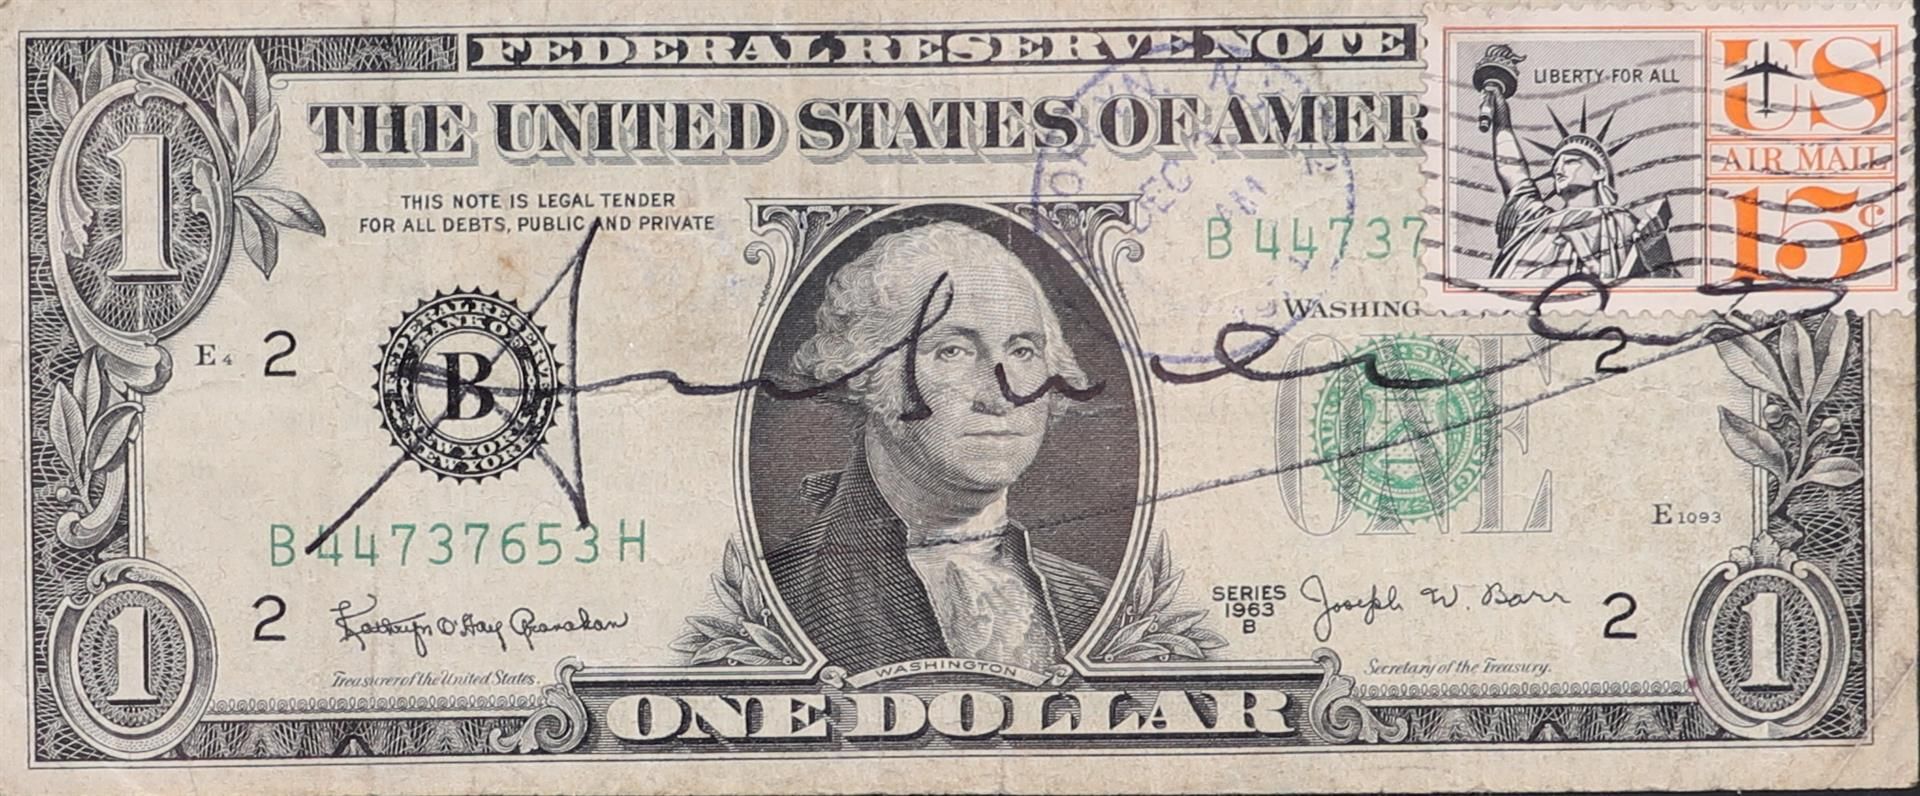 Andy Warhol (Pittsburg 1928 - 1987 New York), (after), One Dollar Bill, 